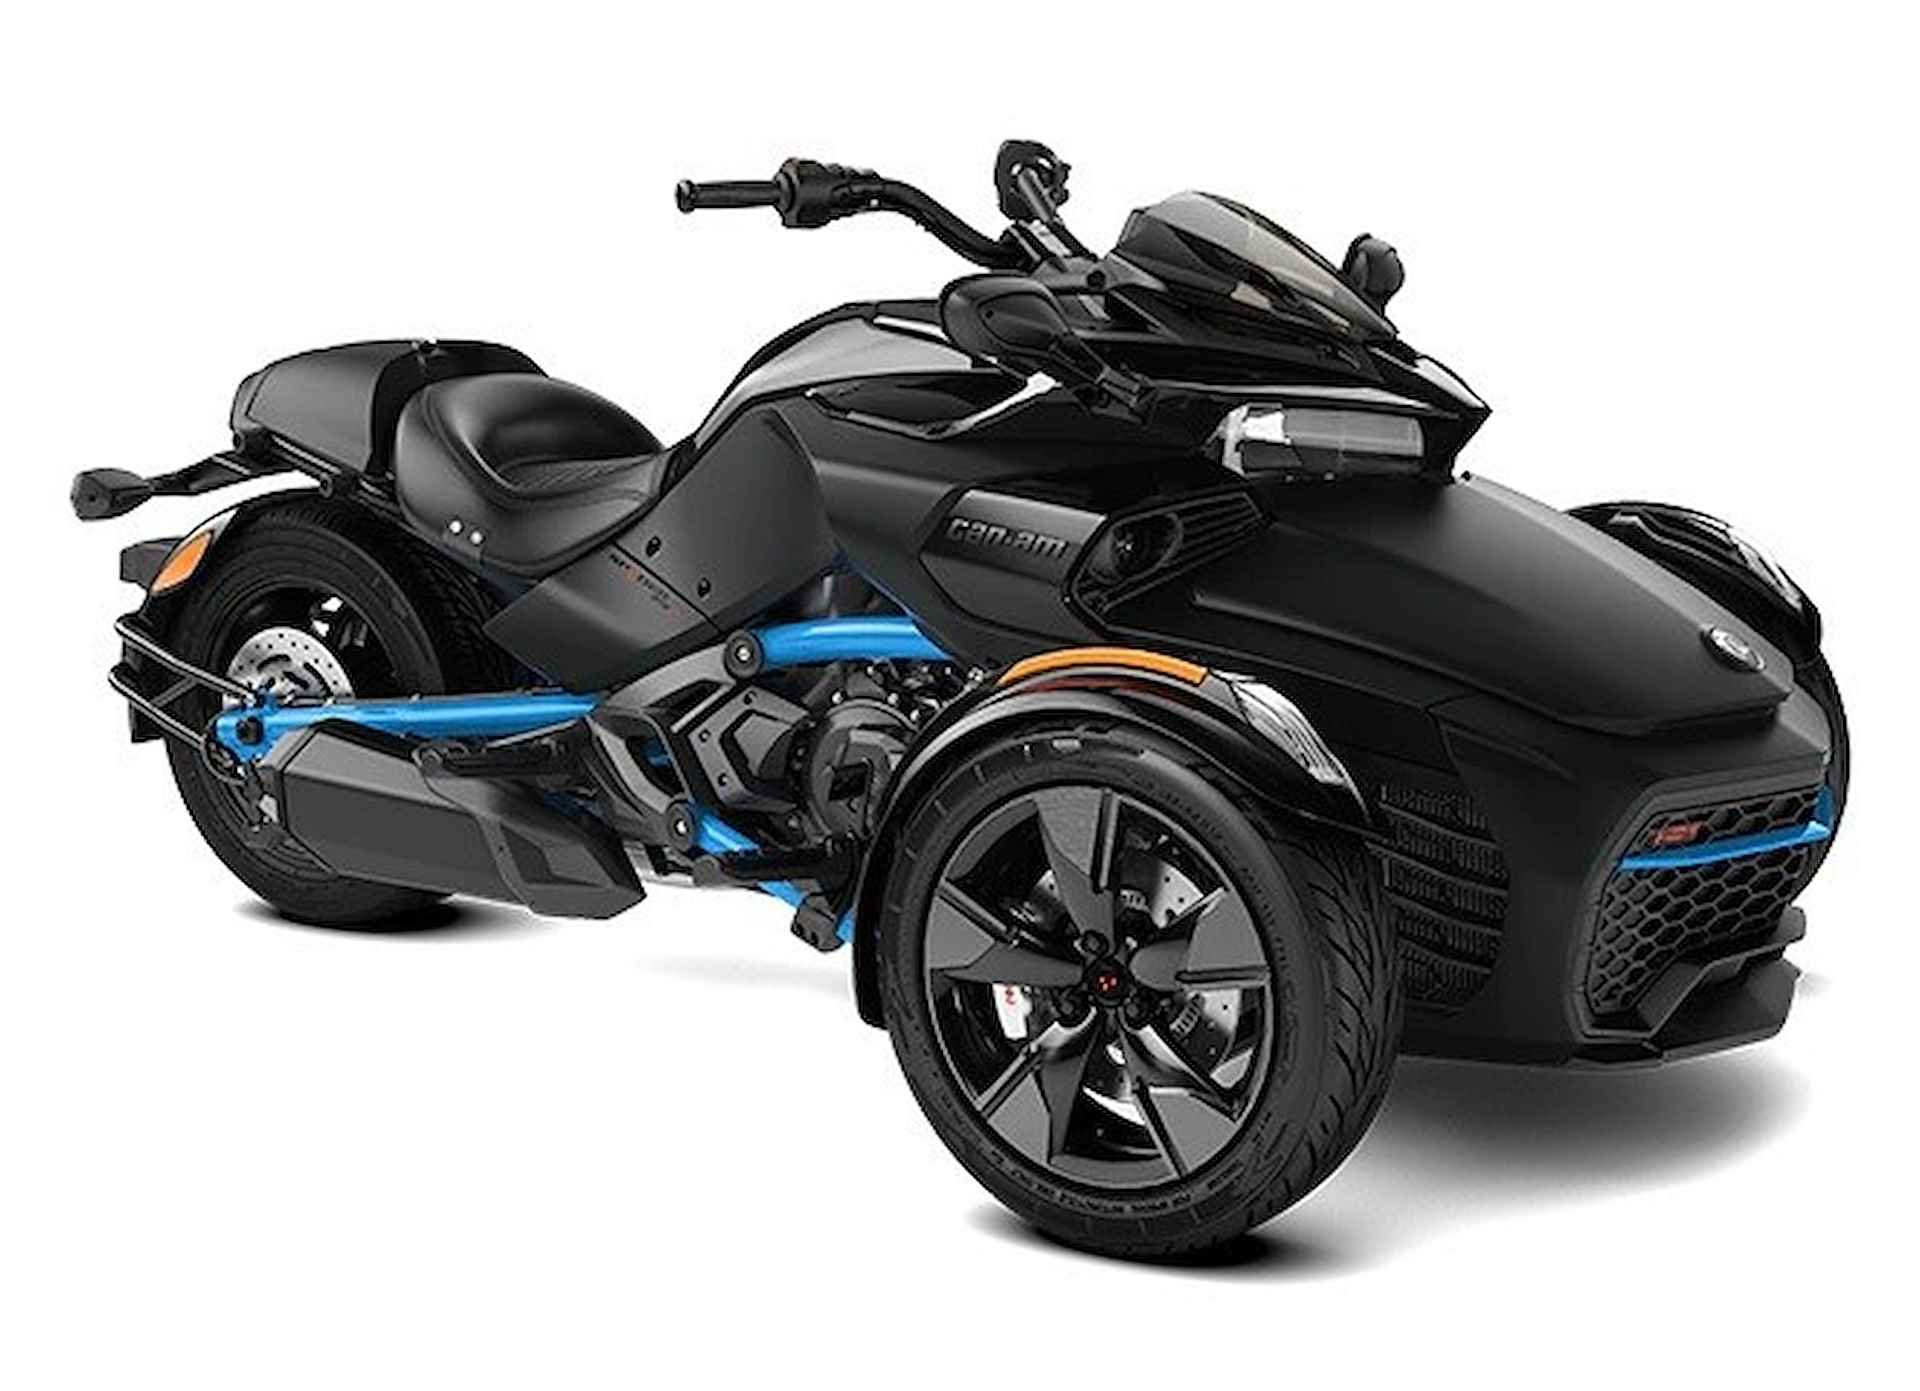 CAN-AM SPYDER F3-S SPECIAL SERIES NU 1800.- KORTING OP CAN AM - 1/1